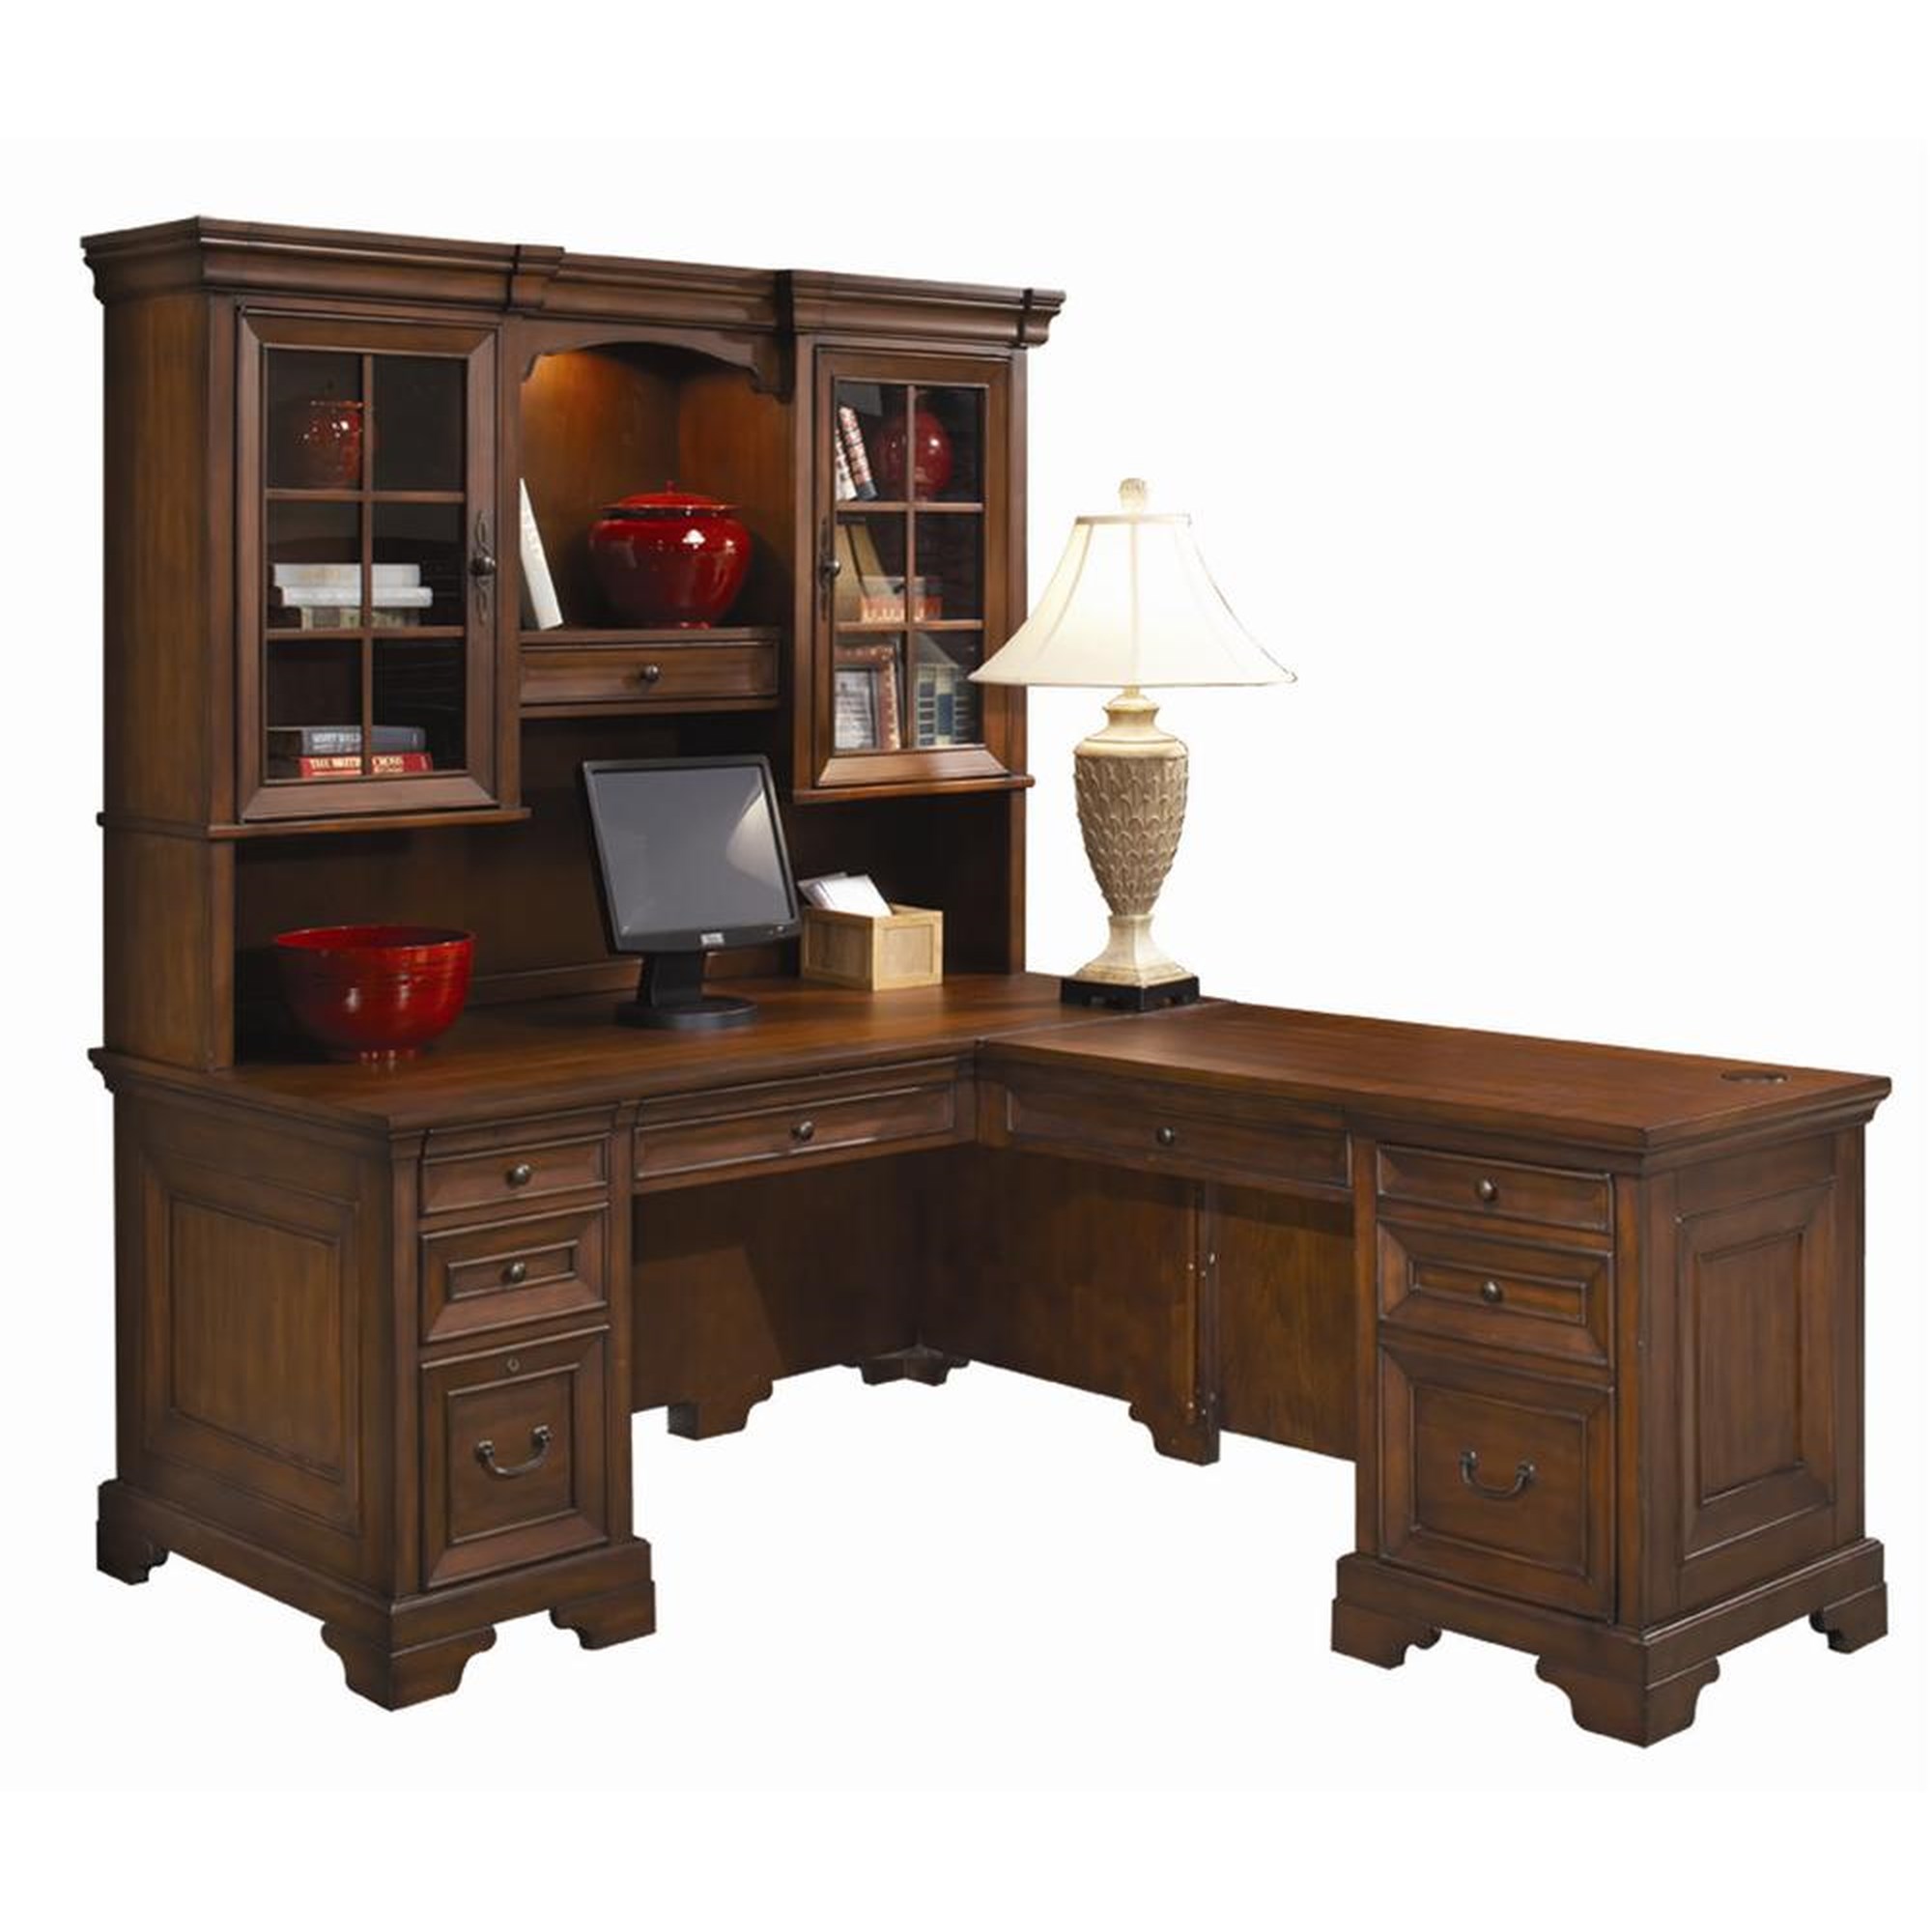 66 L Shaped Desk with Hutch, 66 inch Corner Computer Desks with